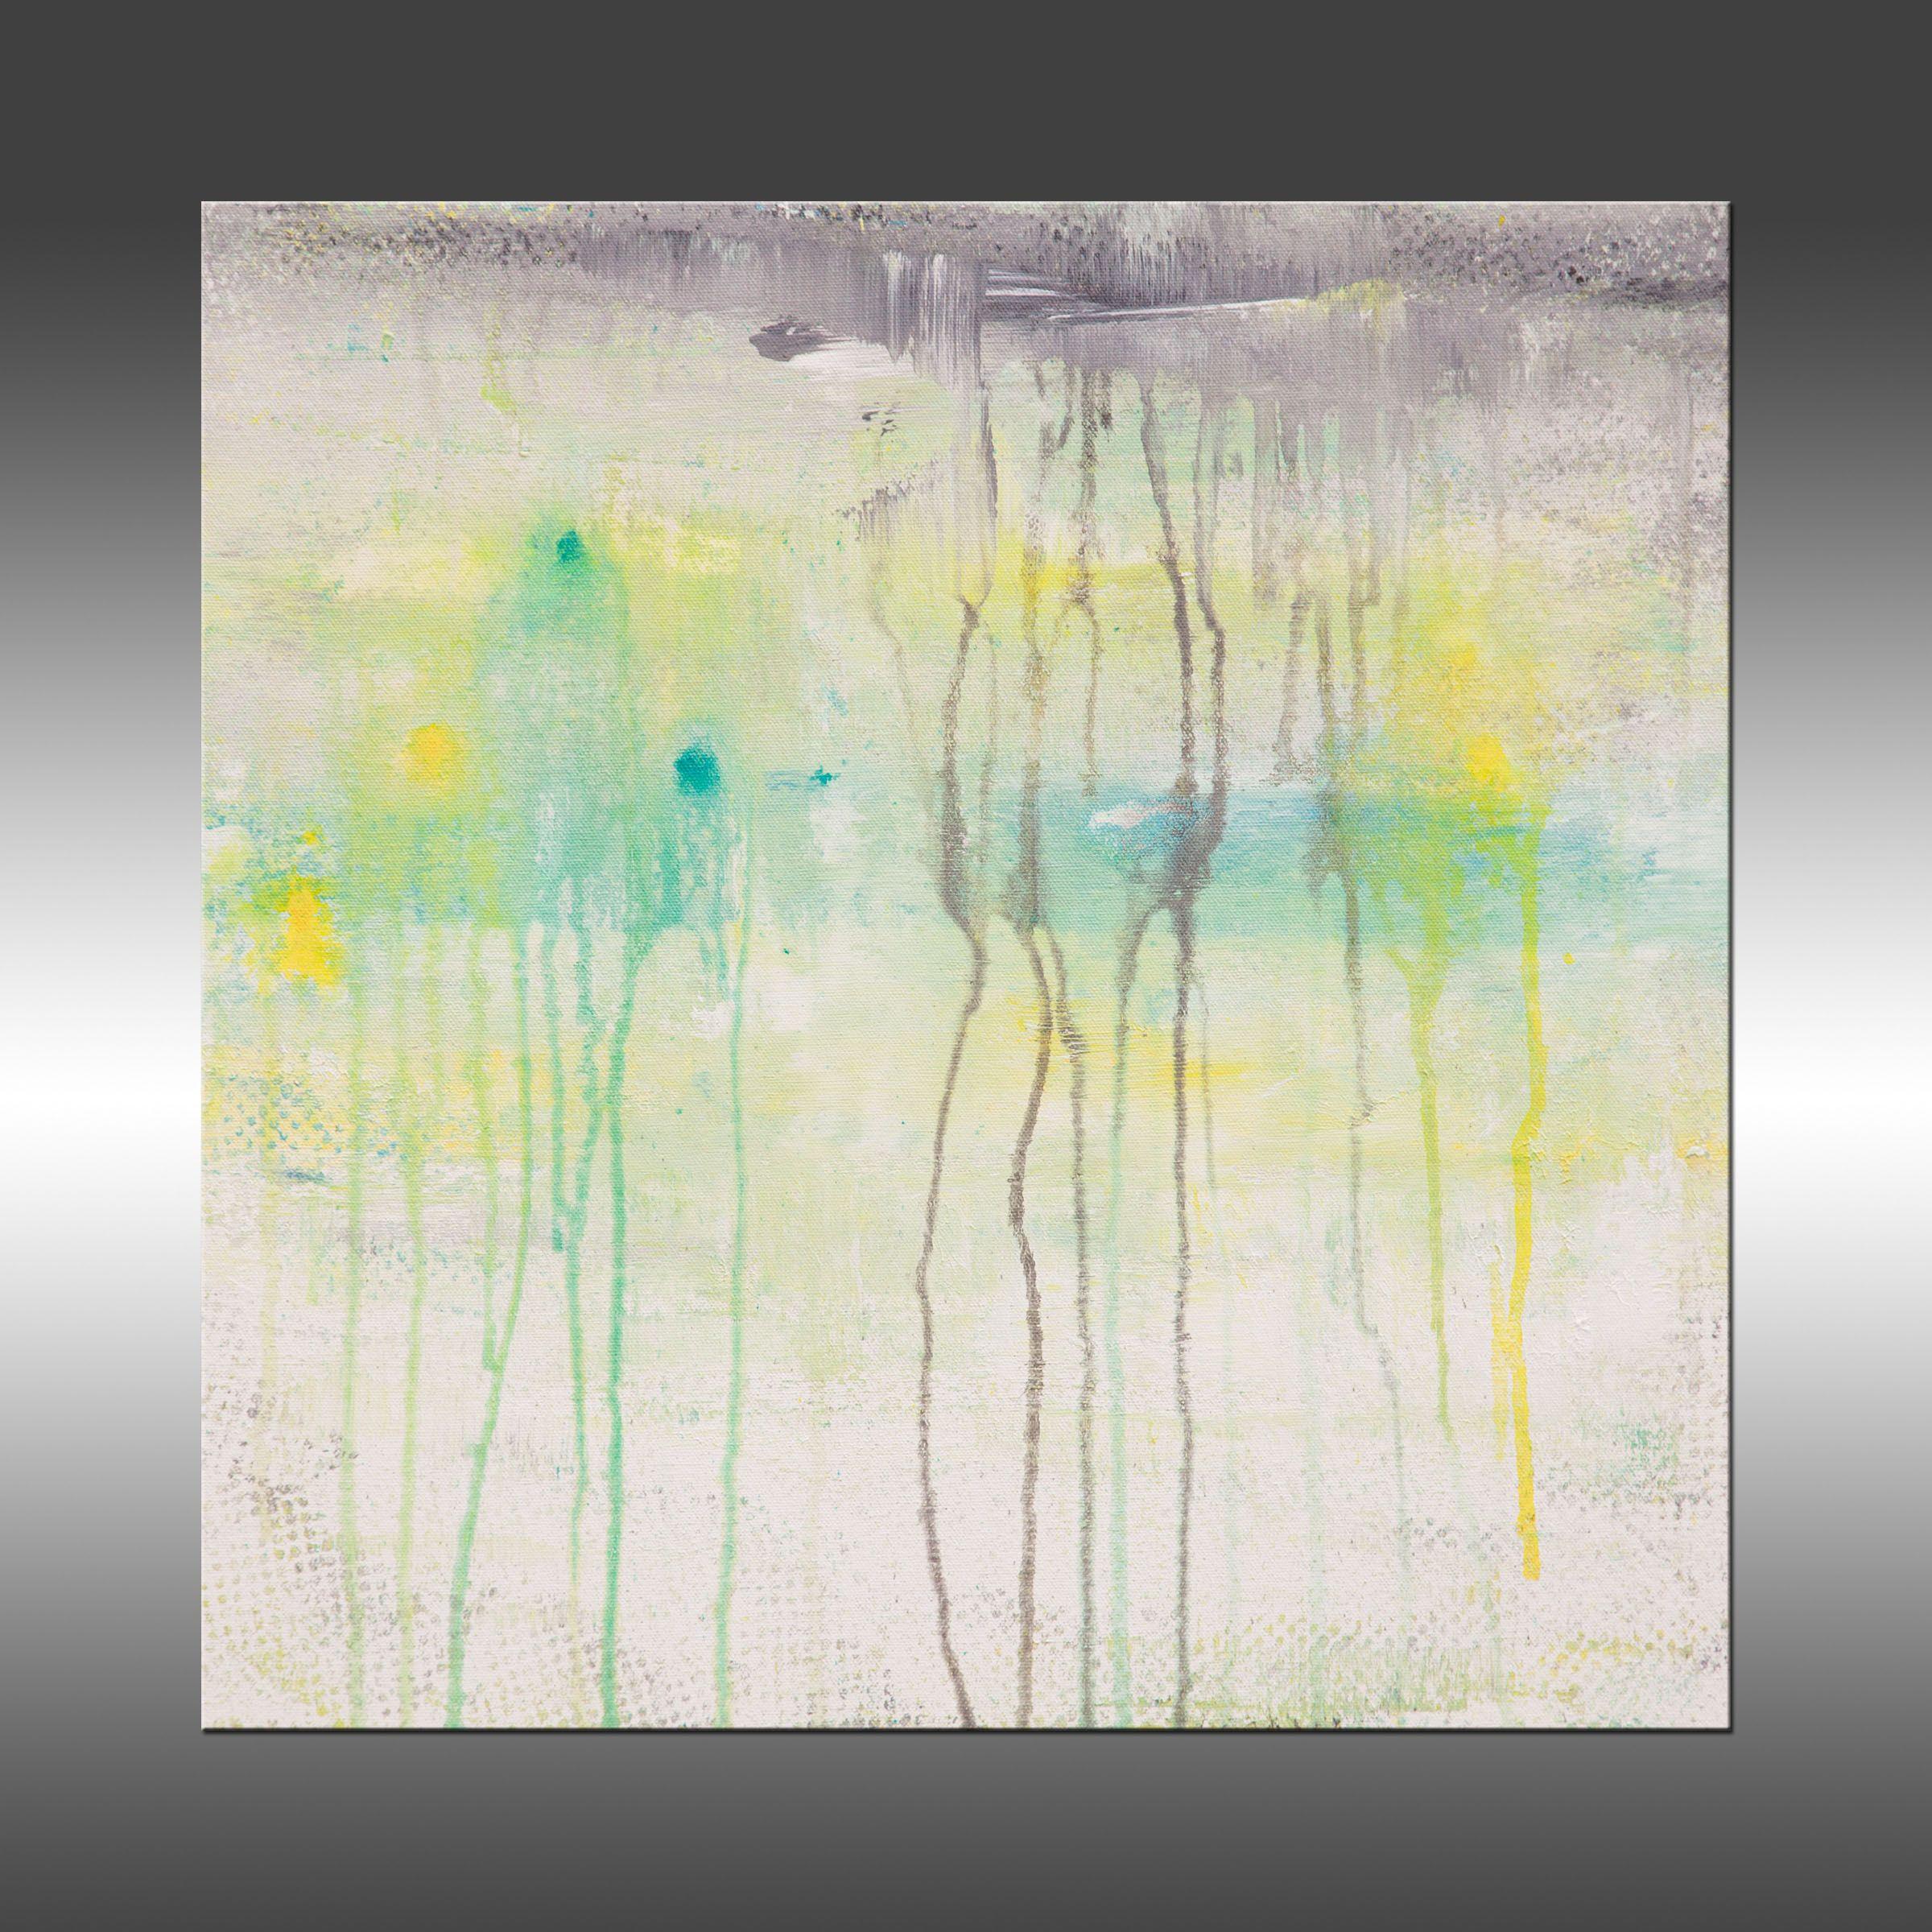 Lithosphere 190 is an original painting, created with acrylic paint on gallery-wrapped canvas. It has a width of 20 inches and a height of 20 inches with a depth of 1.5 inches (20x20x1.5).    The colors used in the painting are white, gray, yellow,